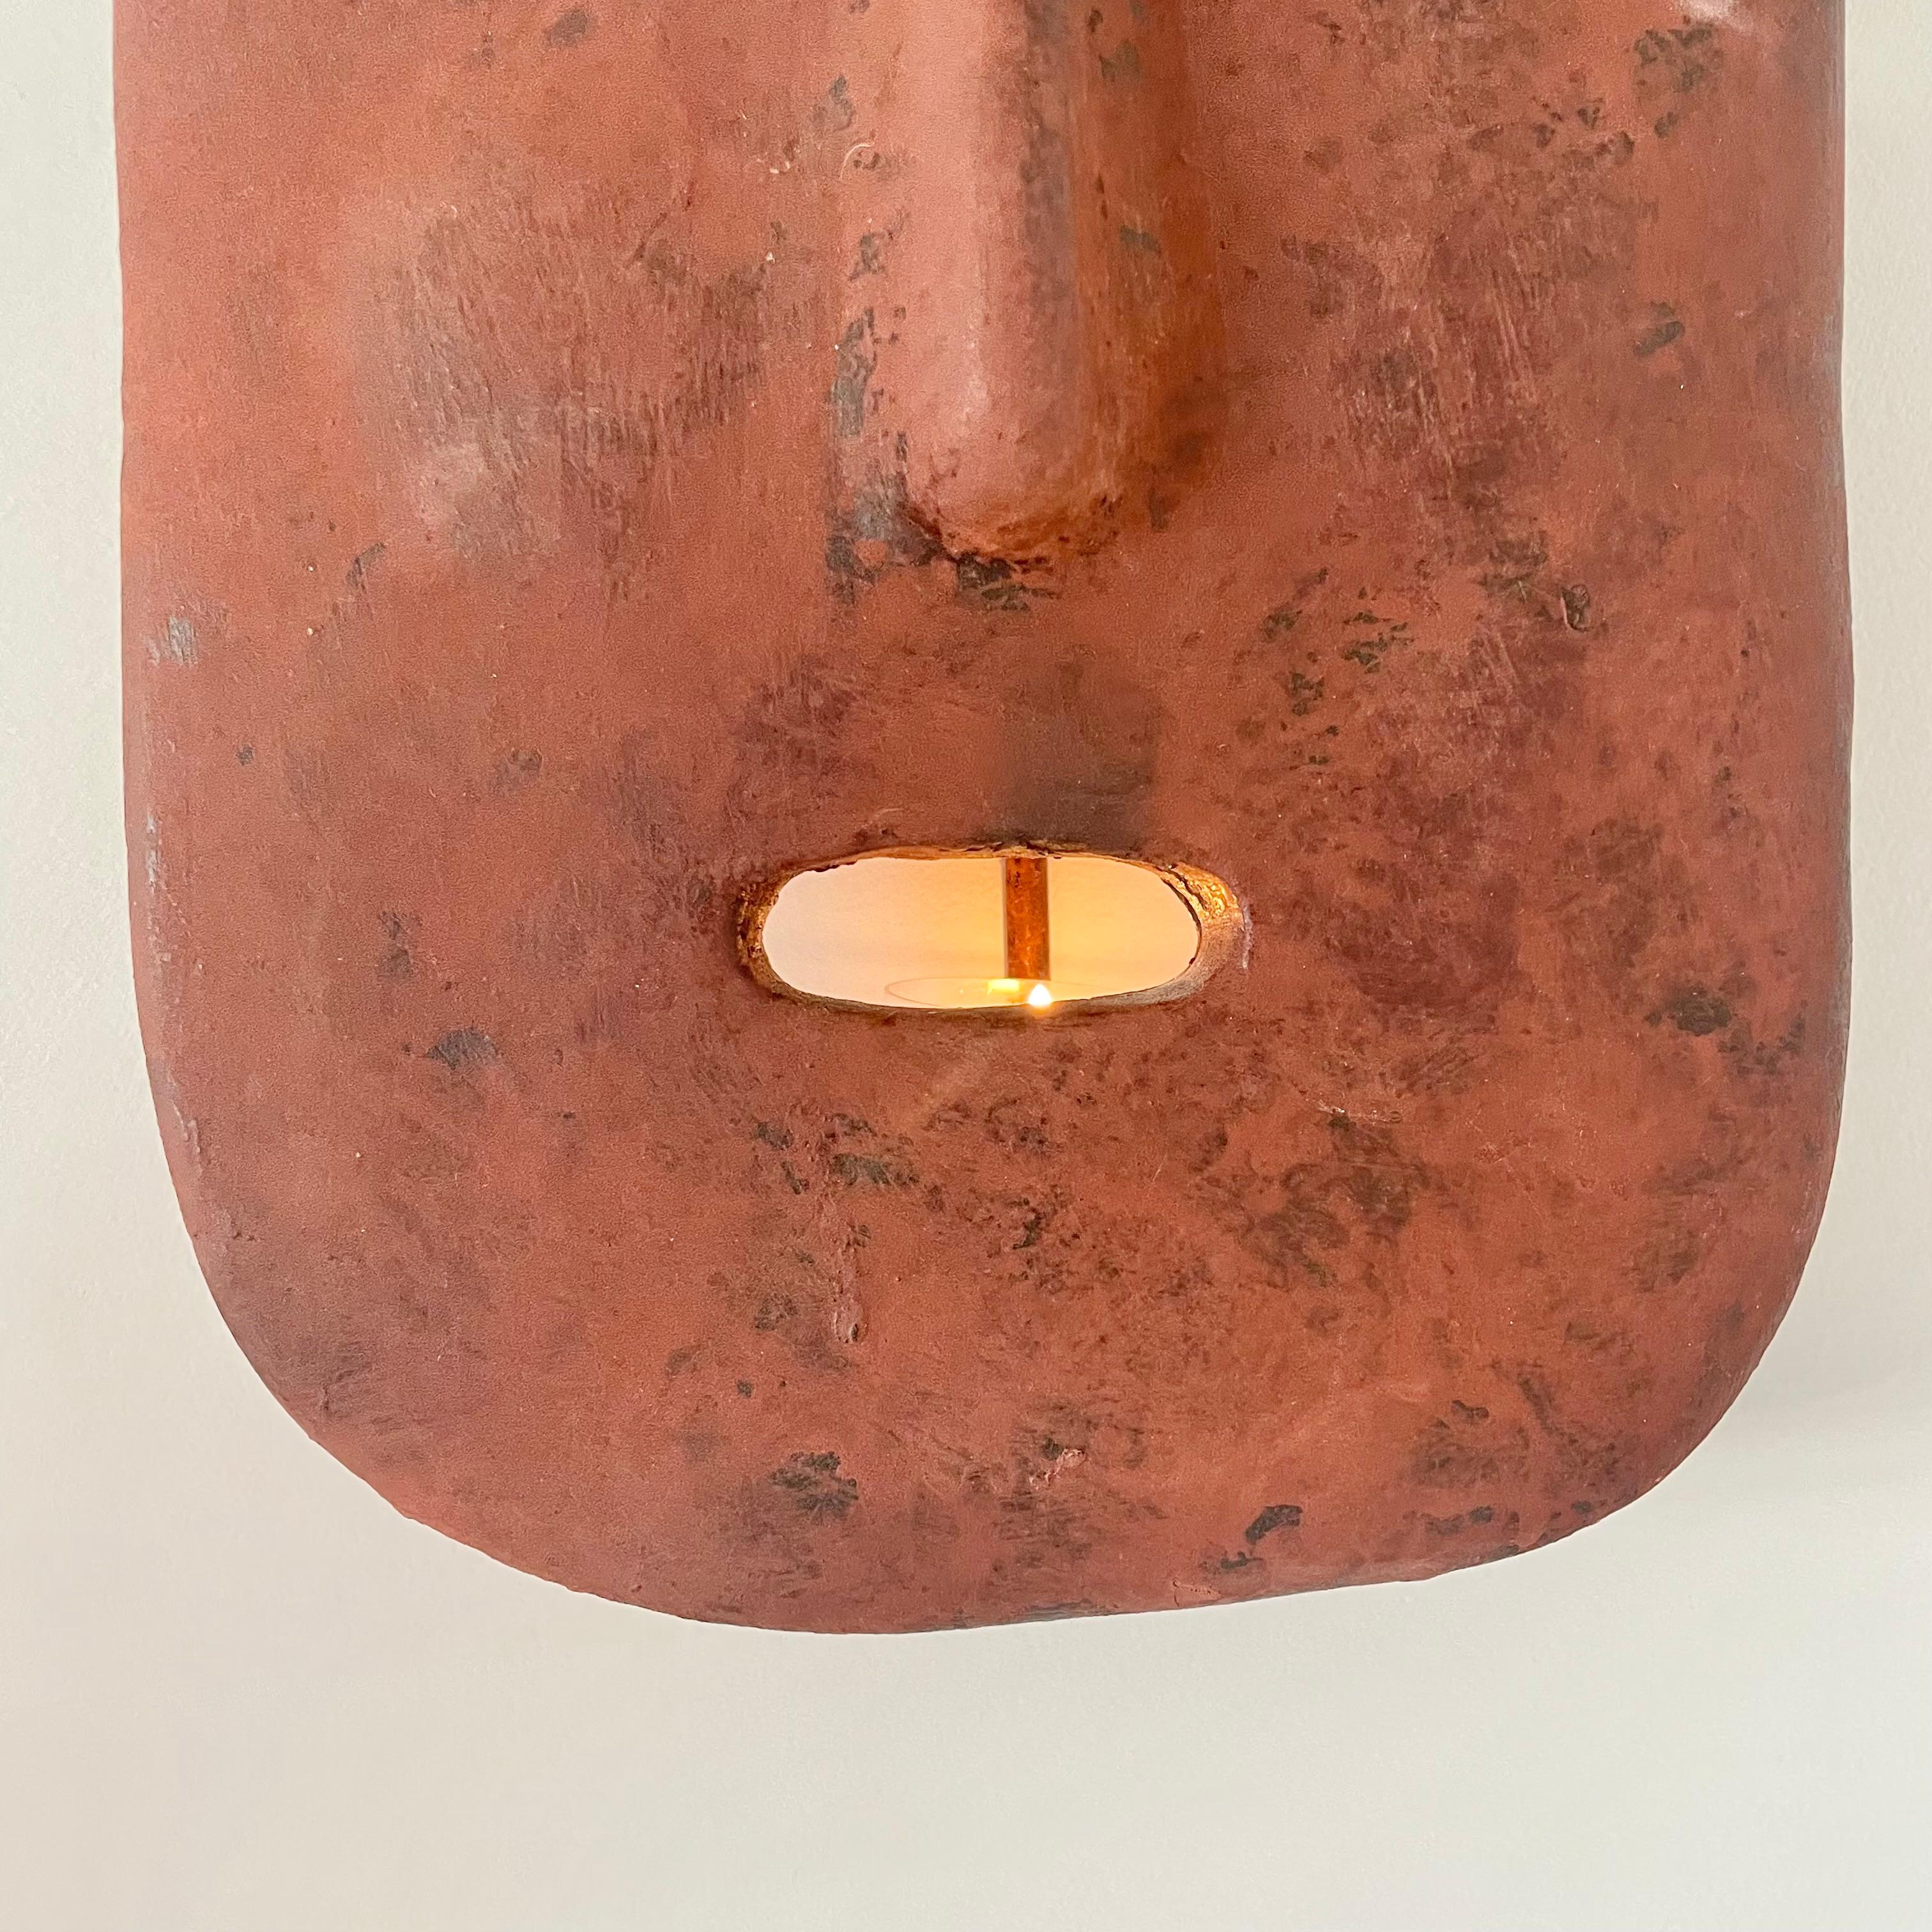 Candle Lit Mask Sconce, 1960s Italy For Sale 1